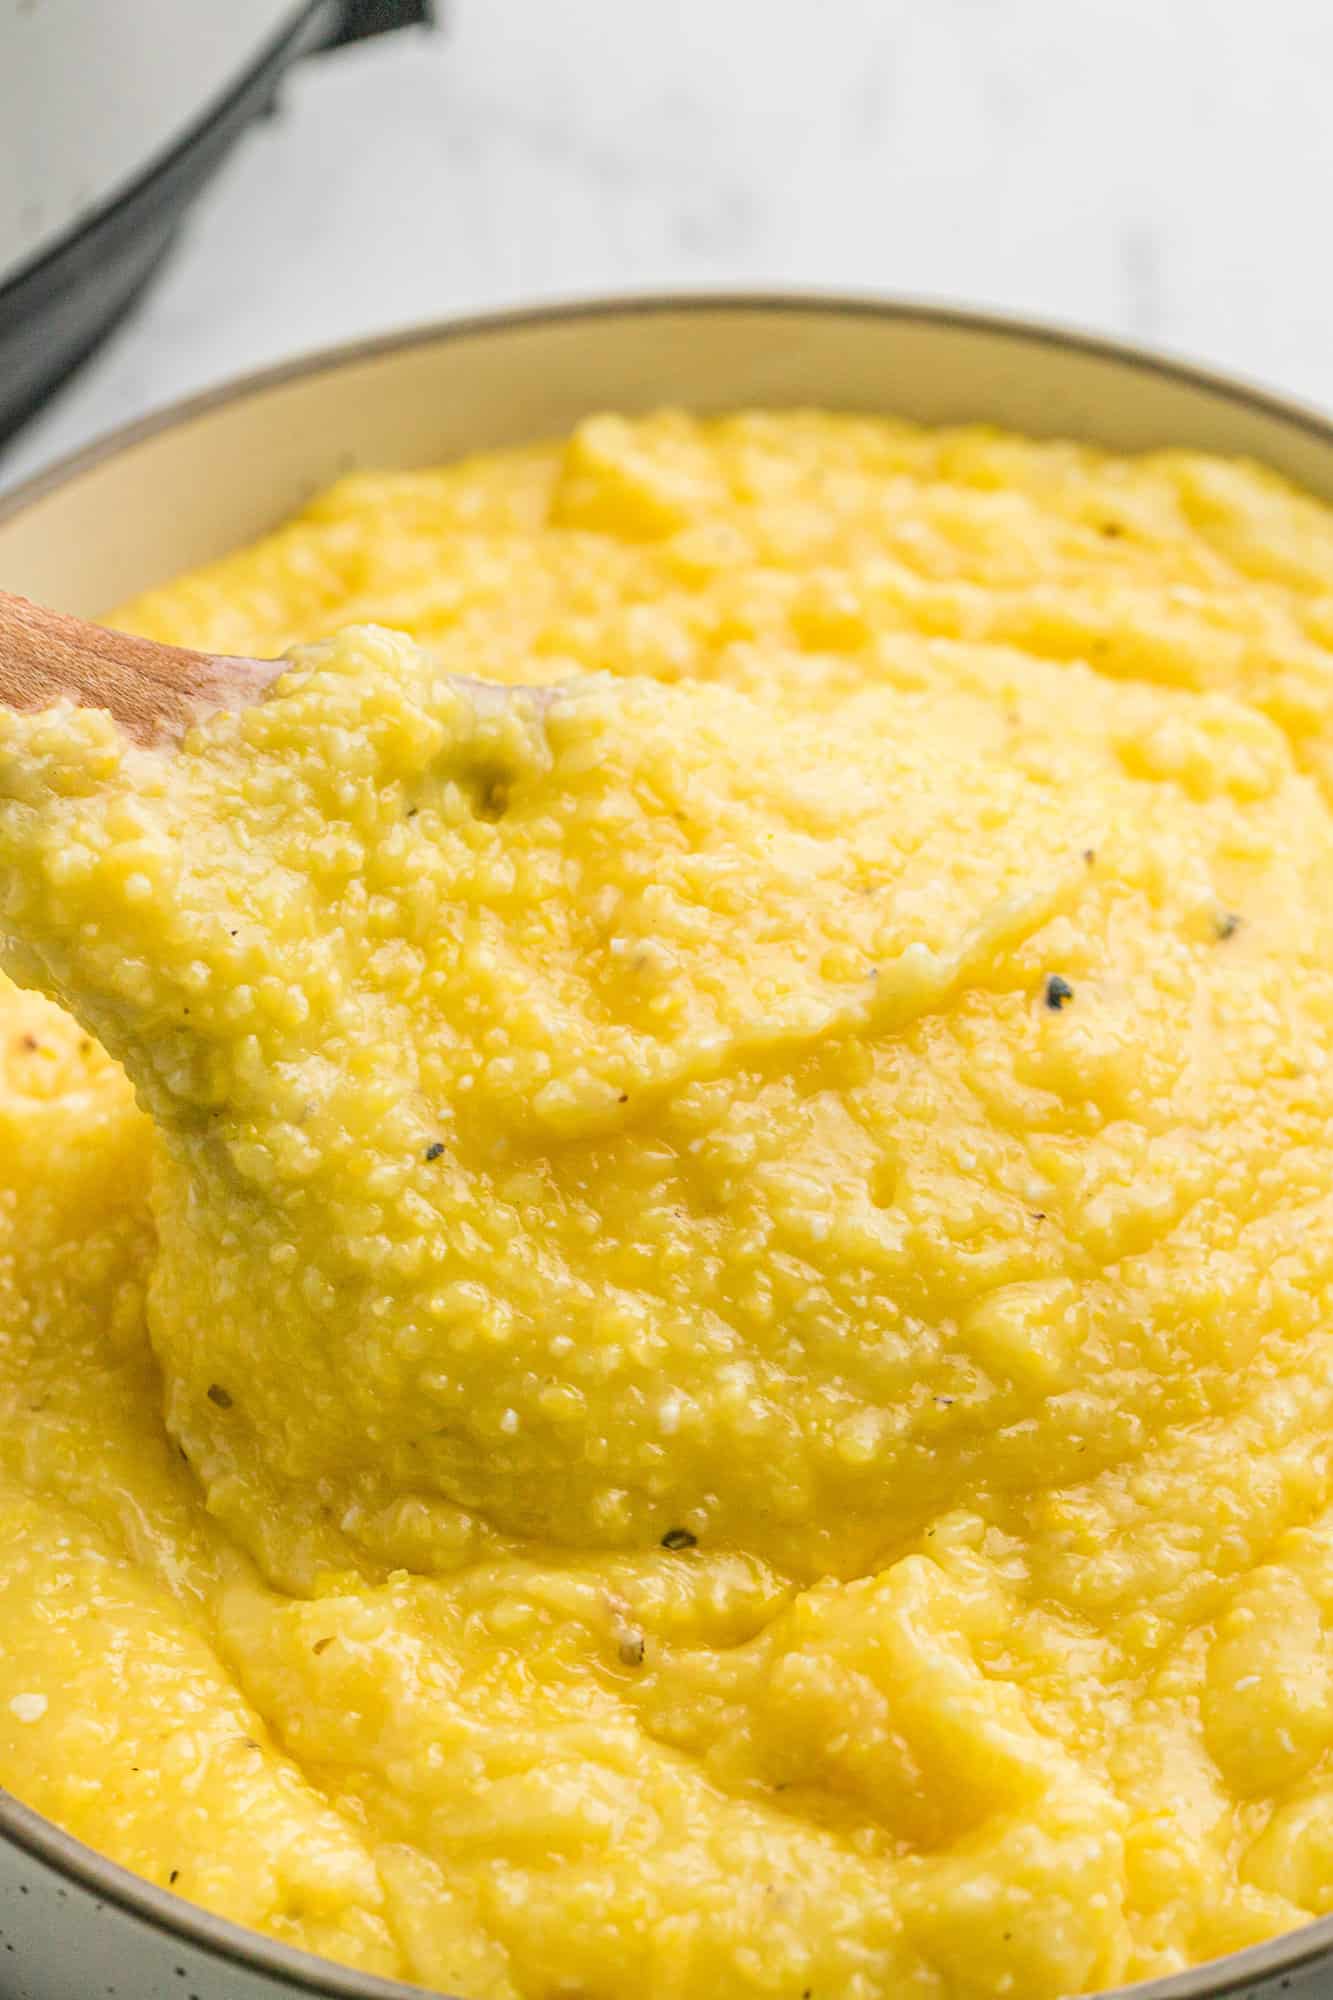 Close up of polenta, showing texture.